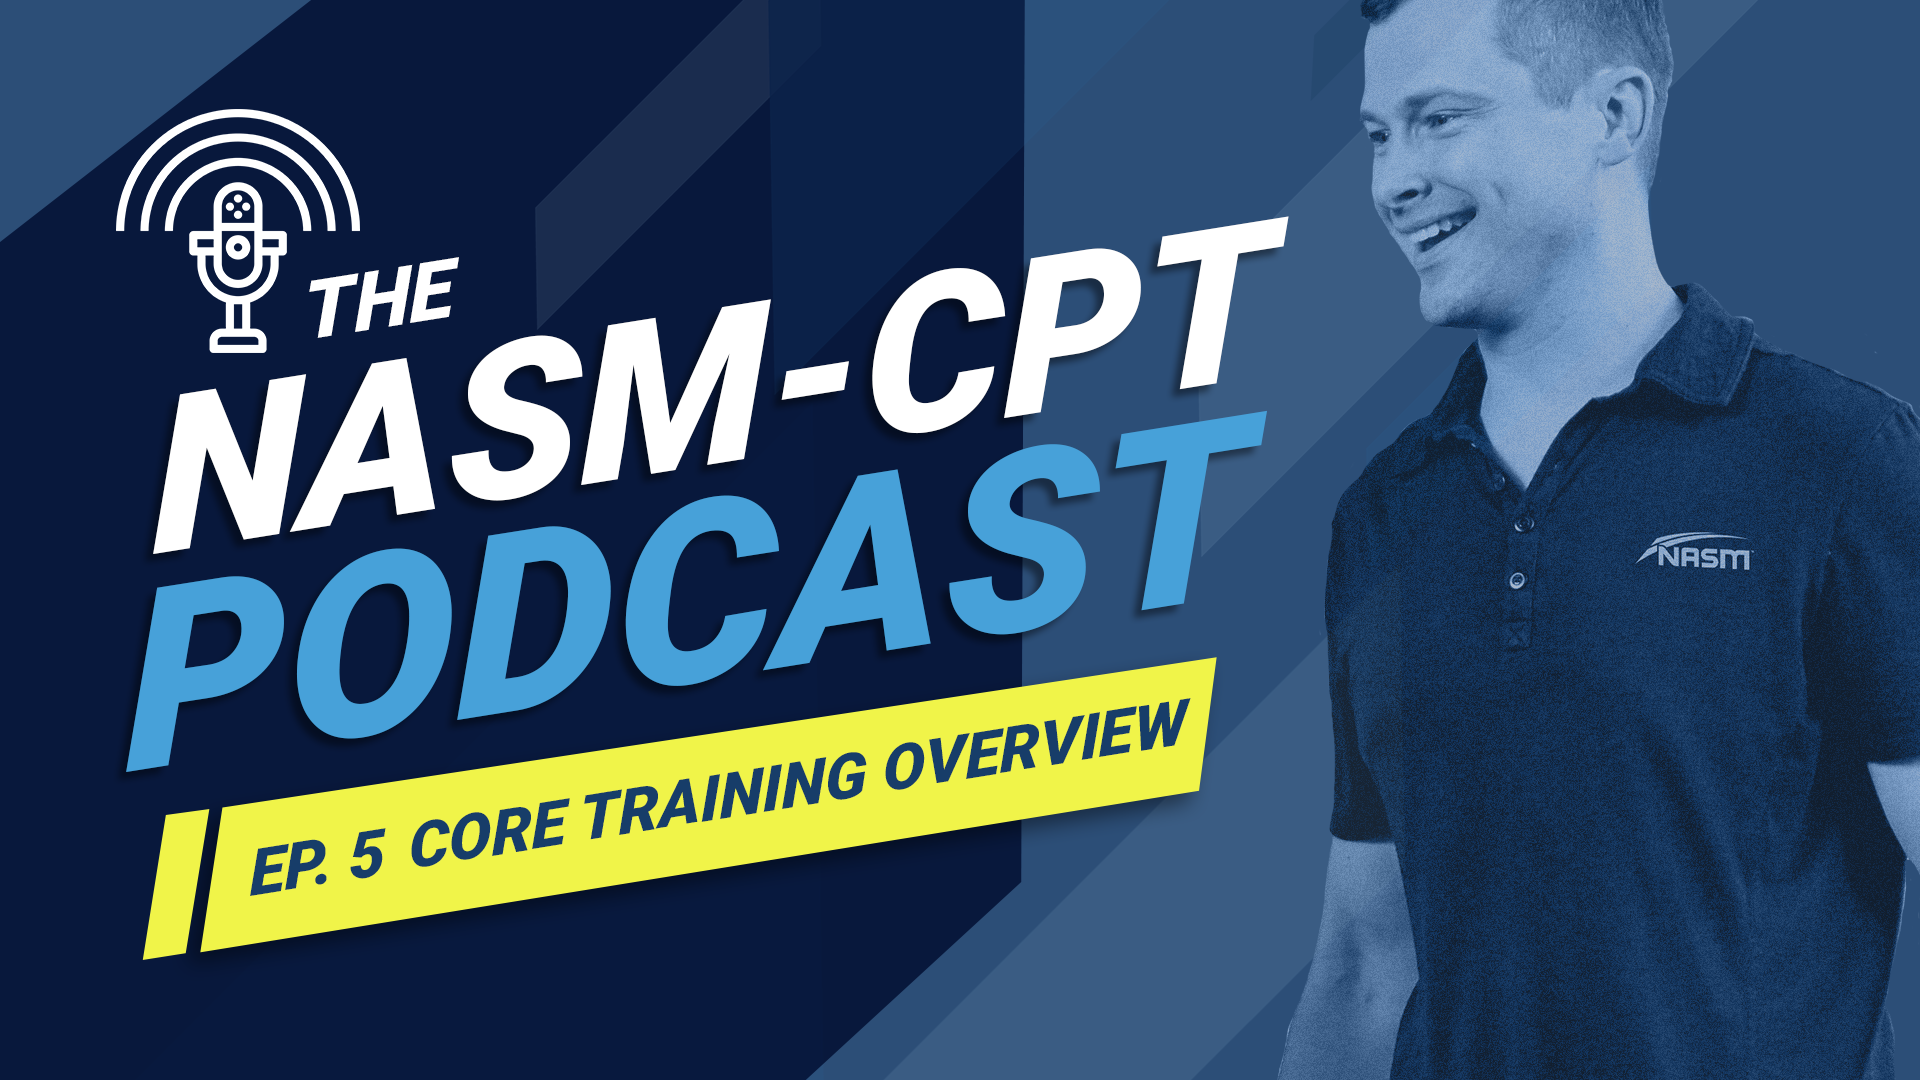 The Nasm Cpt Podcast Core Training Over